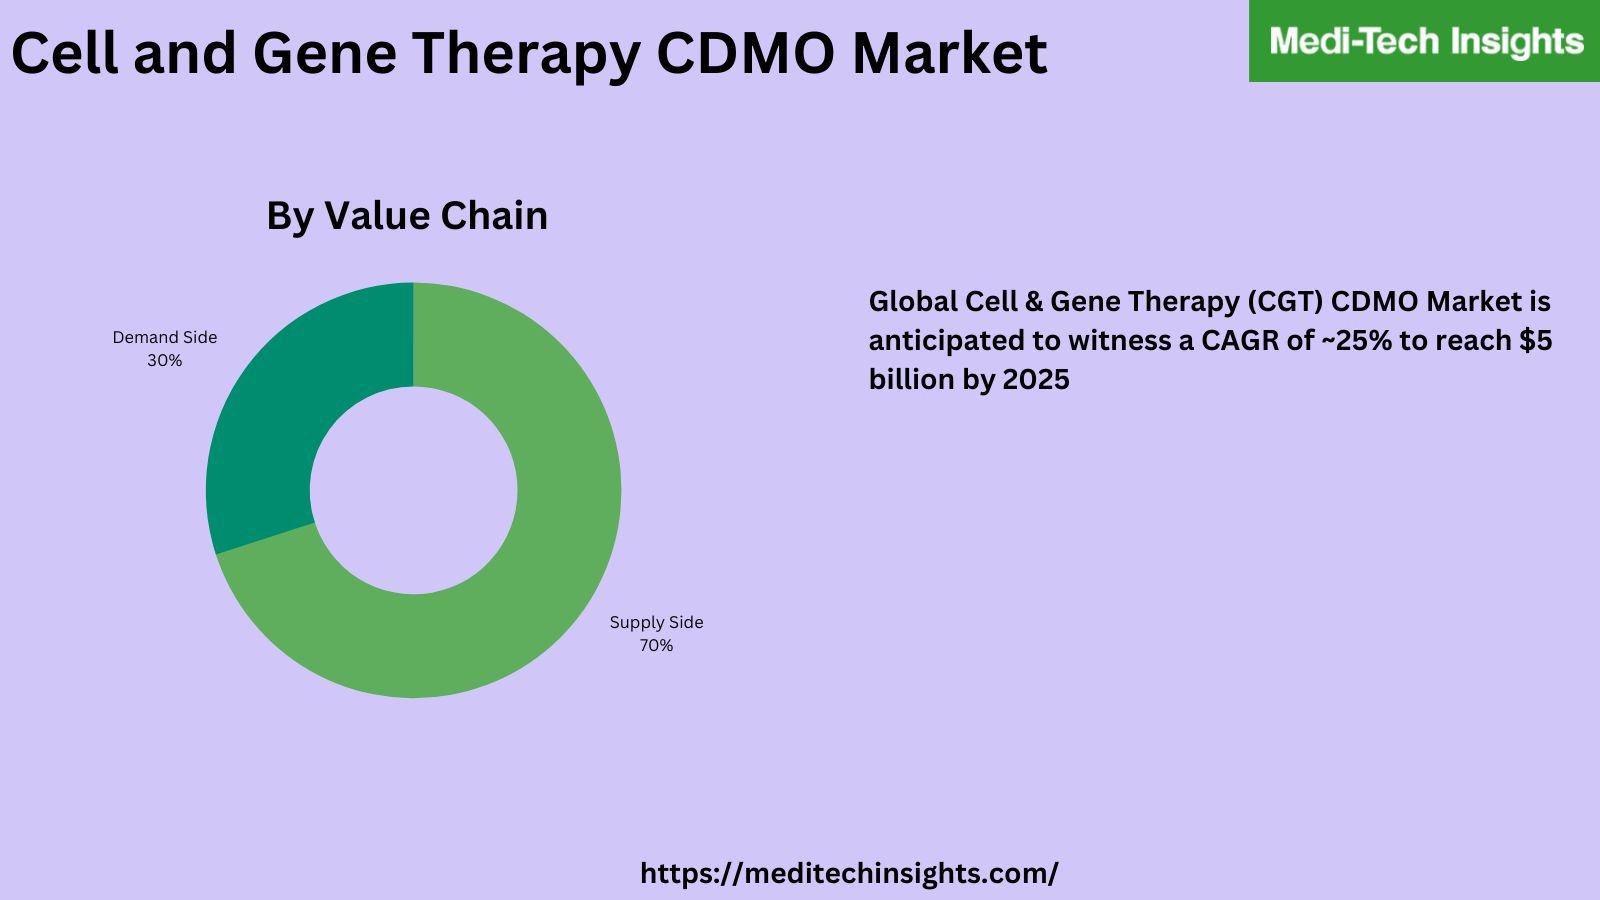 Cell & Gene Therapy (CGT) CDMO Market is anticipated to grow at a CAGR of ~25% to reach ~$5 billion by 2025